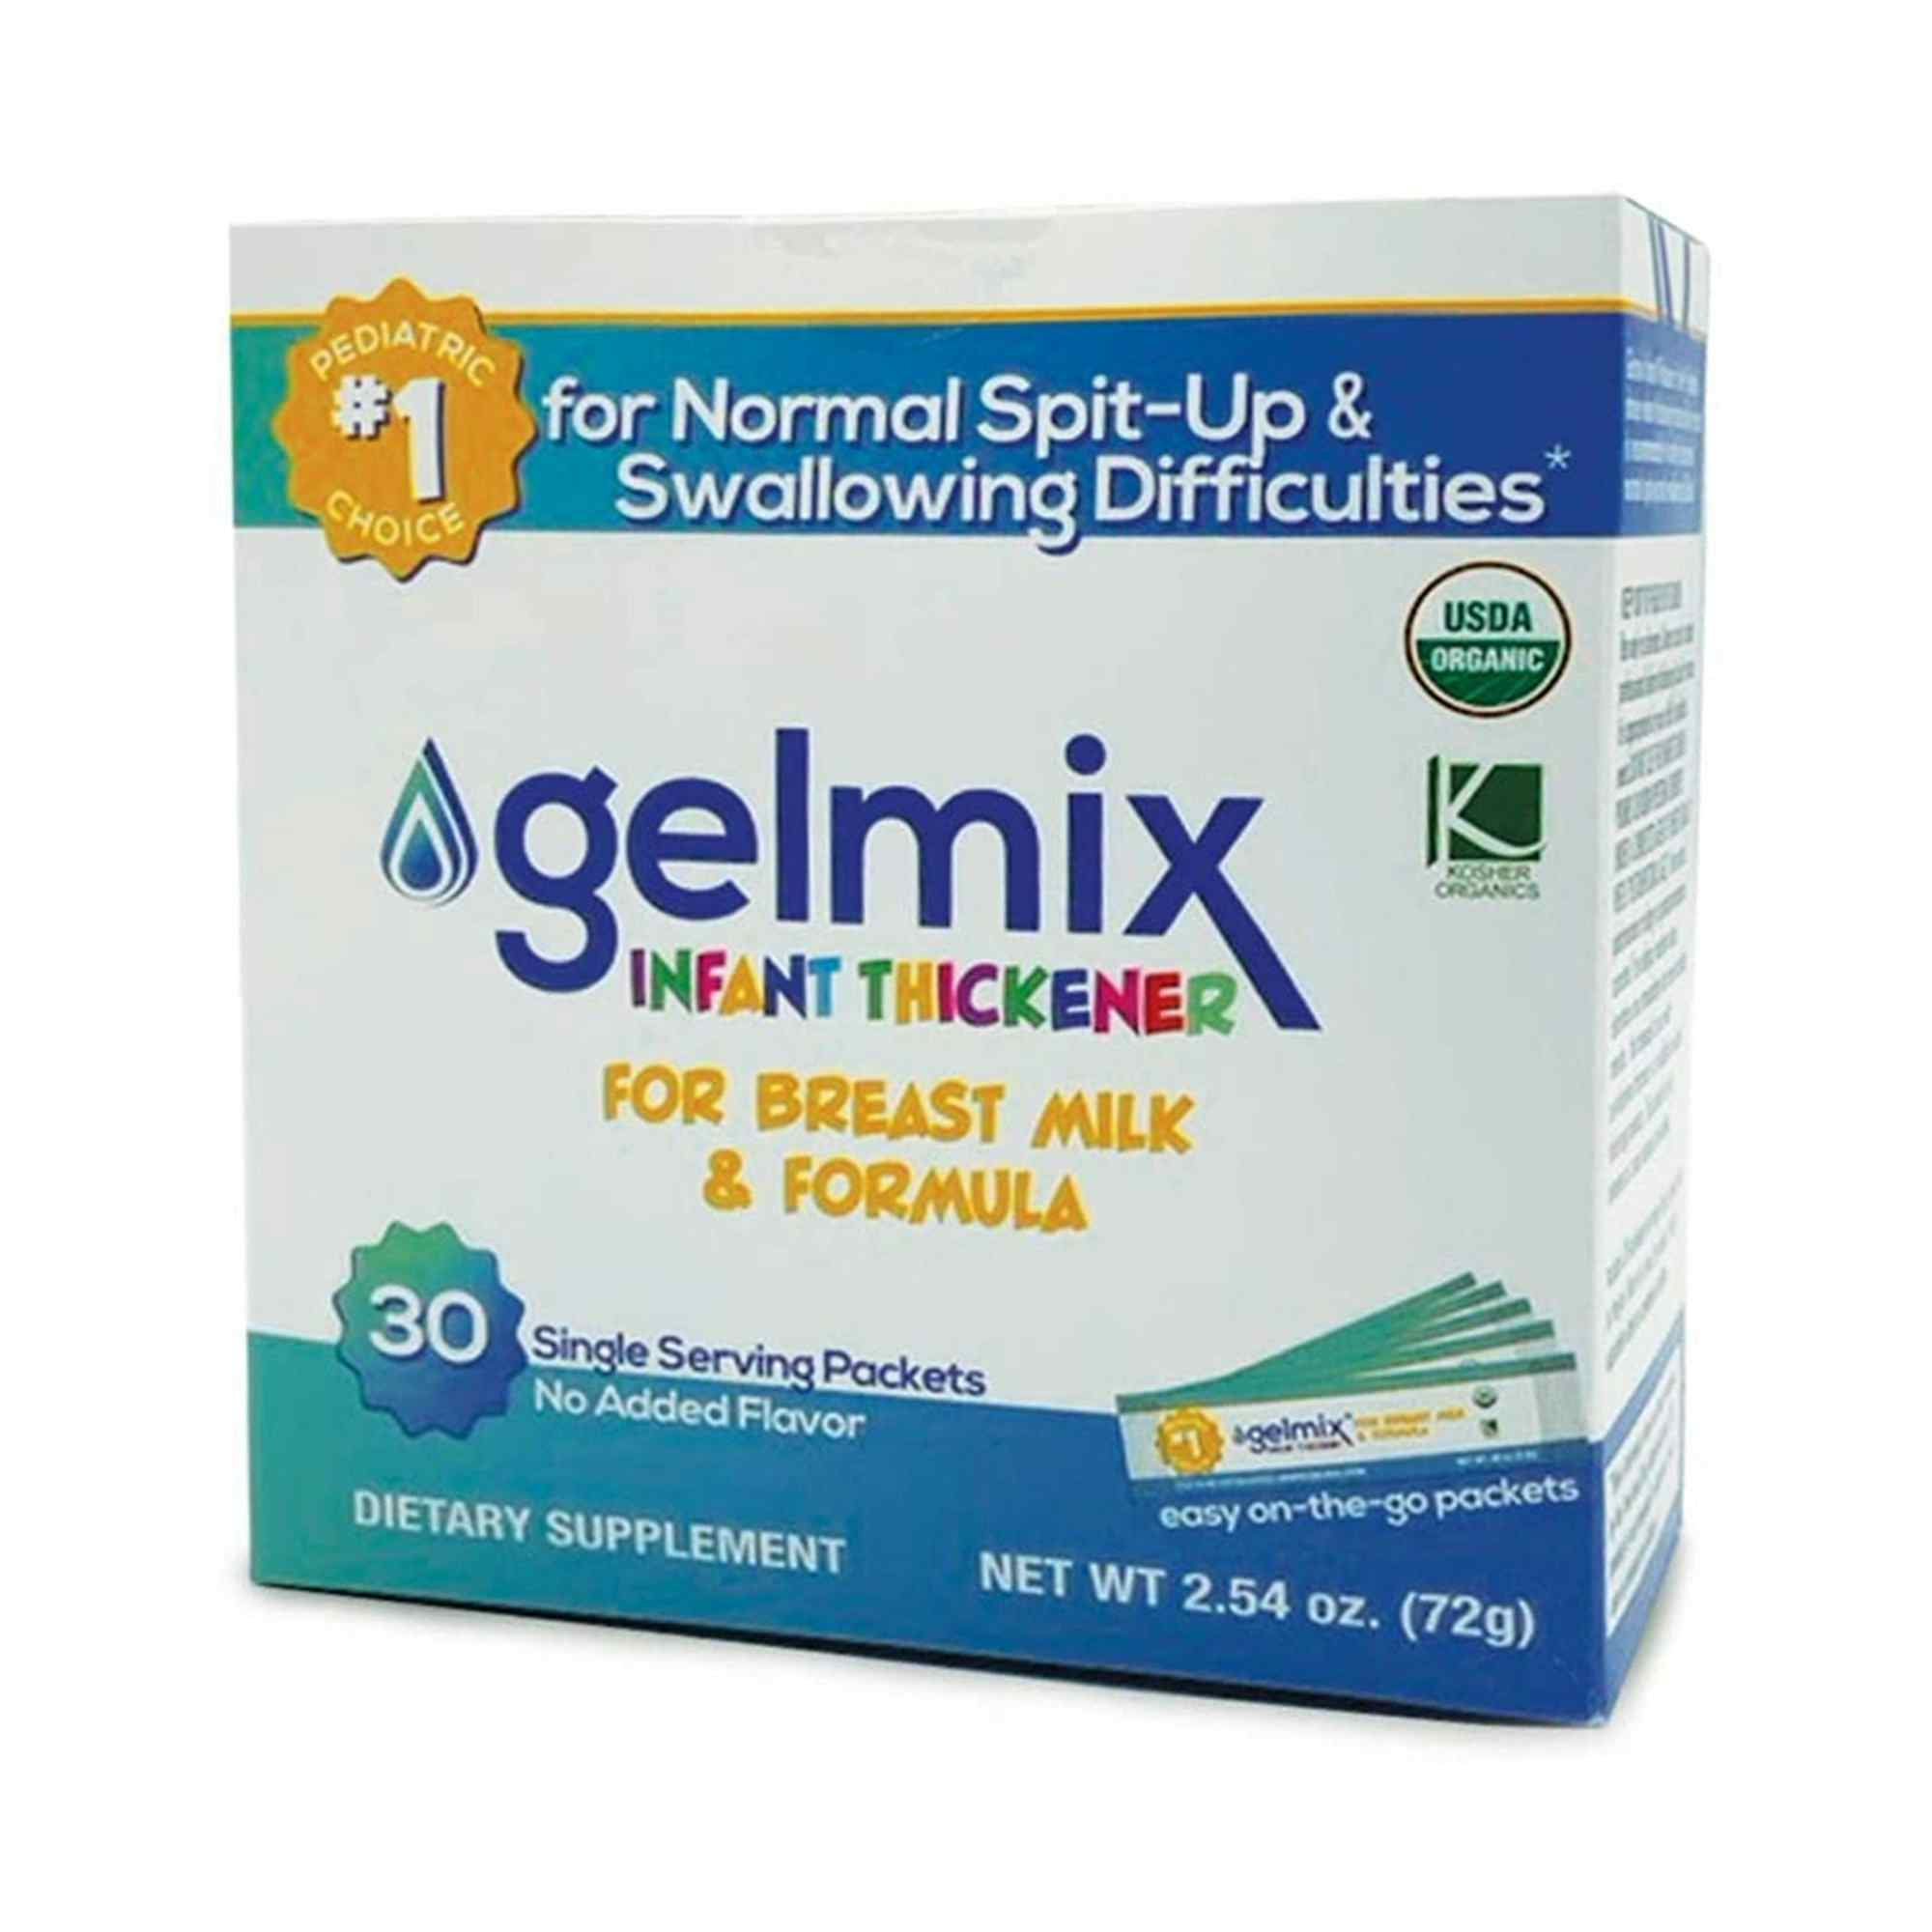 Gelmix Infant Thickener for Breast Milk & Formula Packets, 2.4 gram, GEL-WHO-005, Box of 30